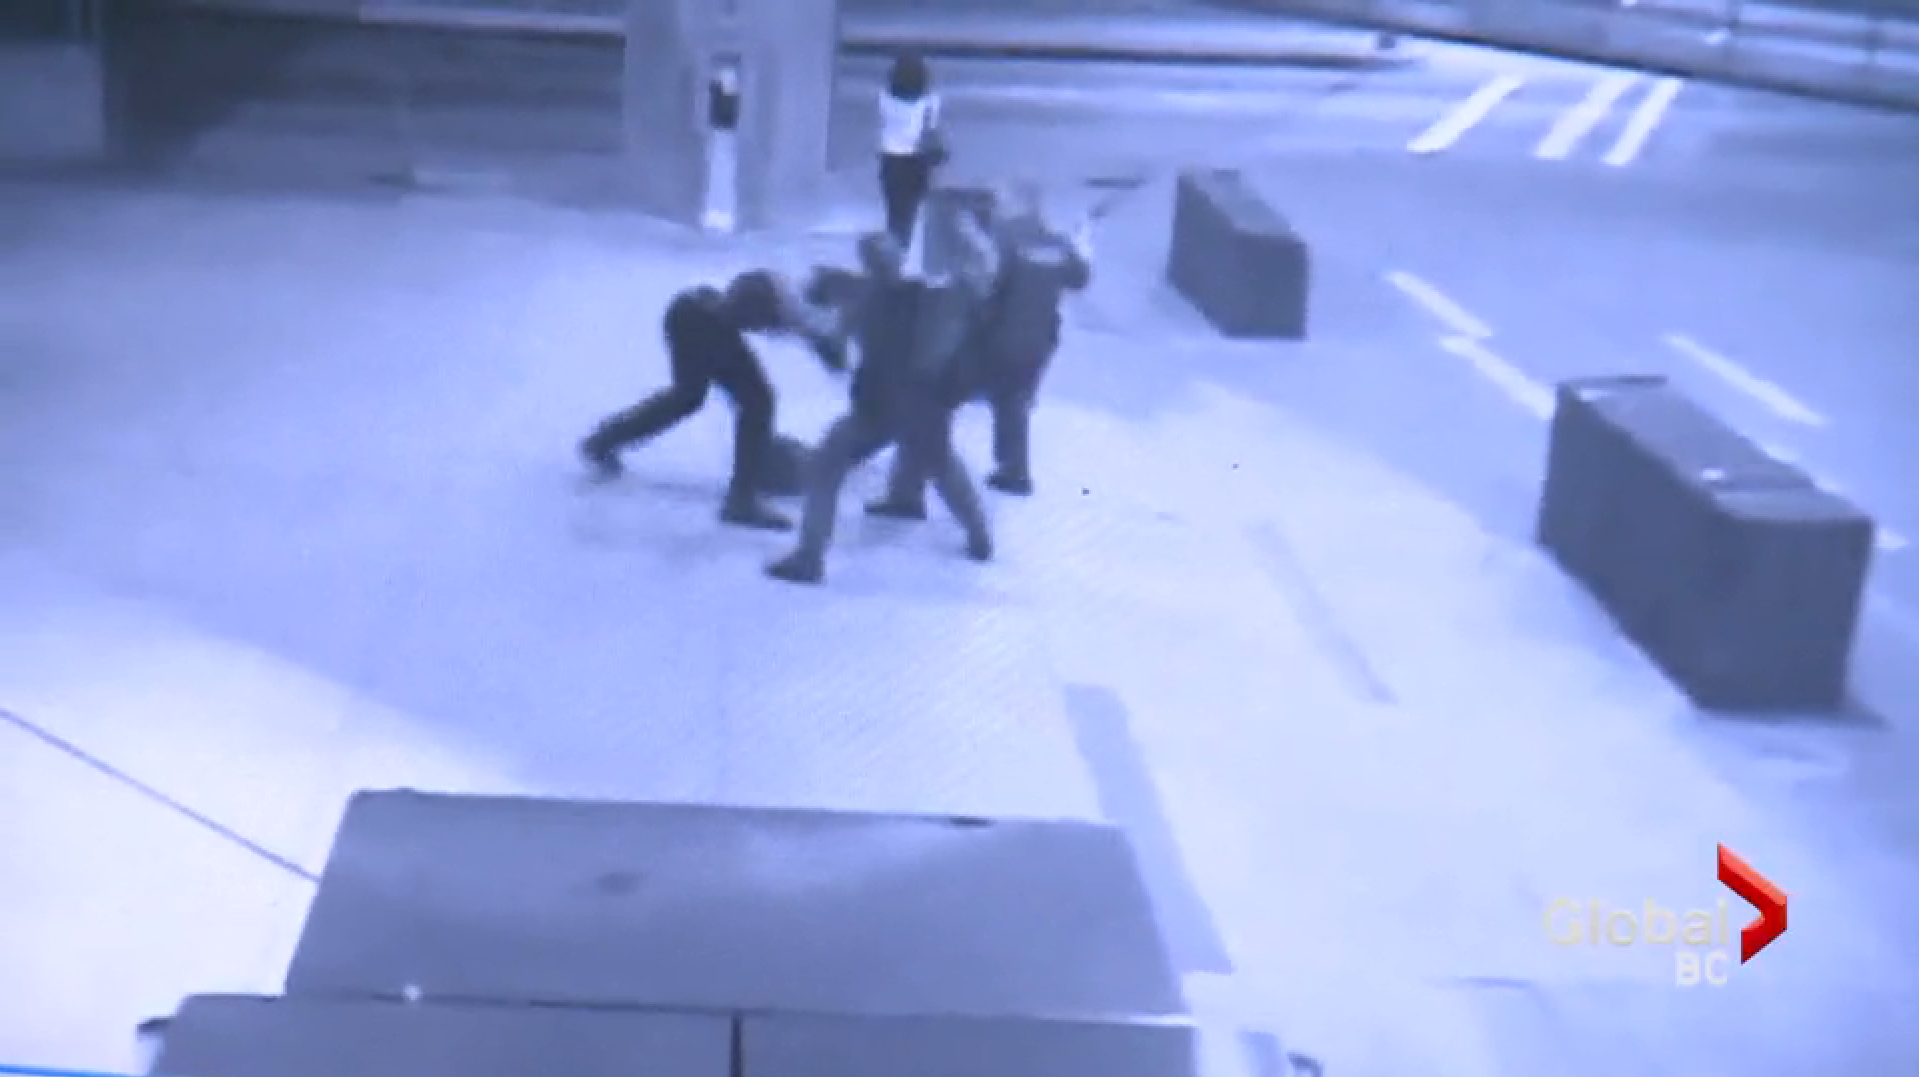 Transit cop who brutally beat UBC student handed 2-day suspension due to discipline delay